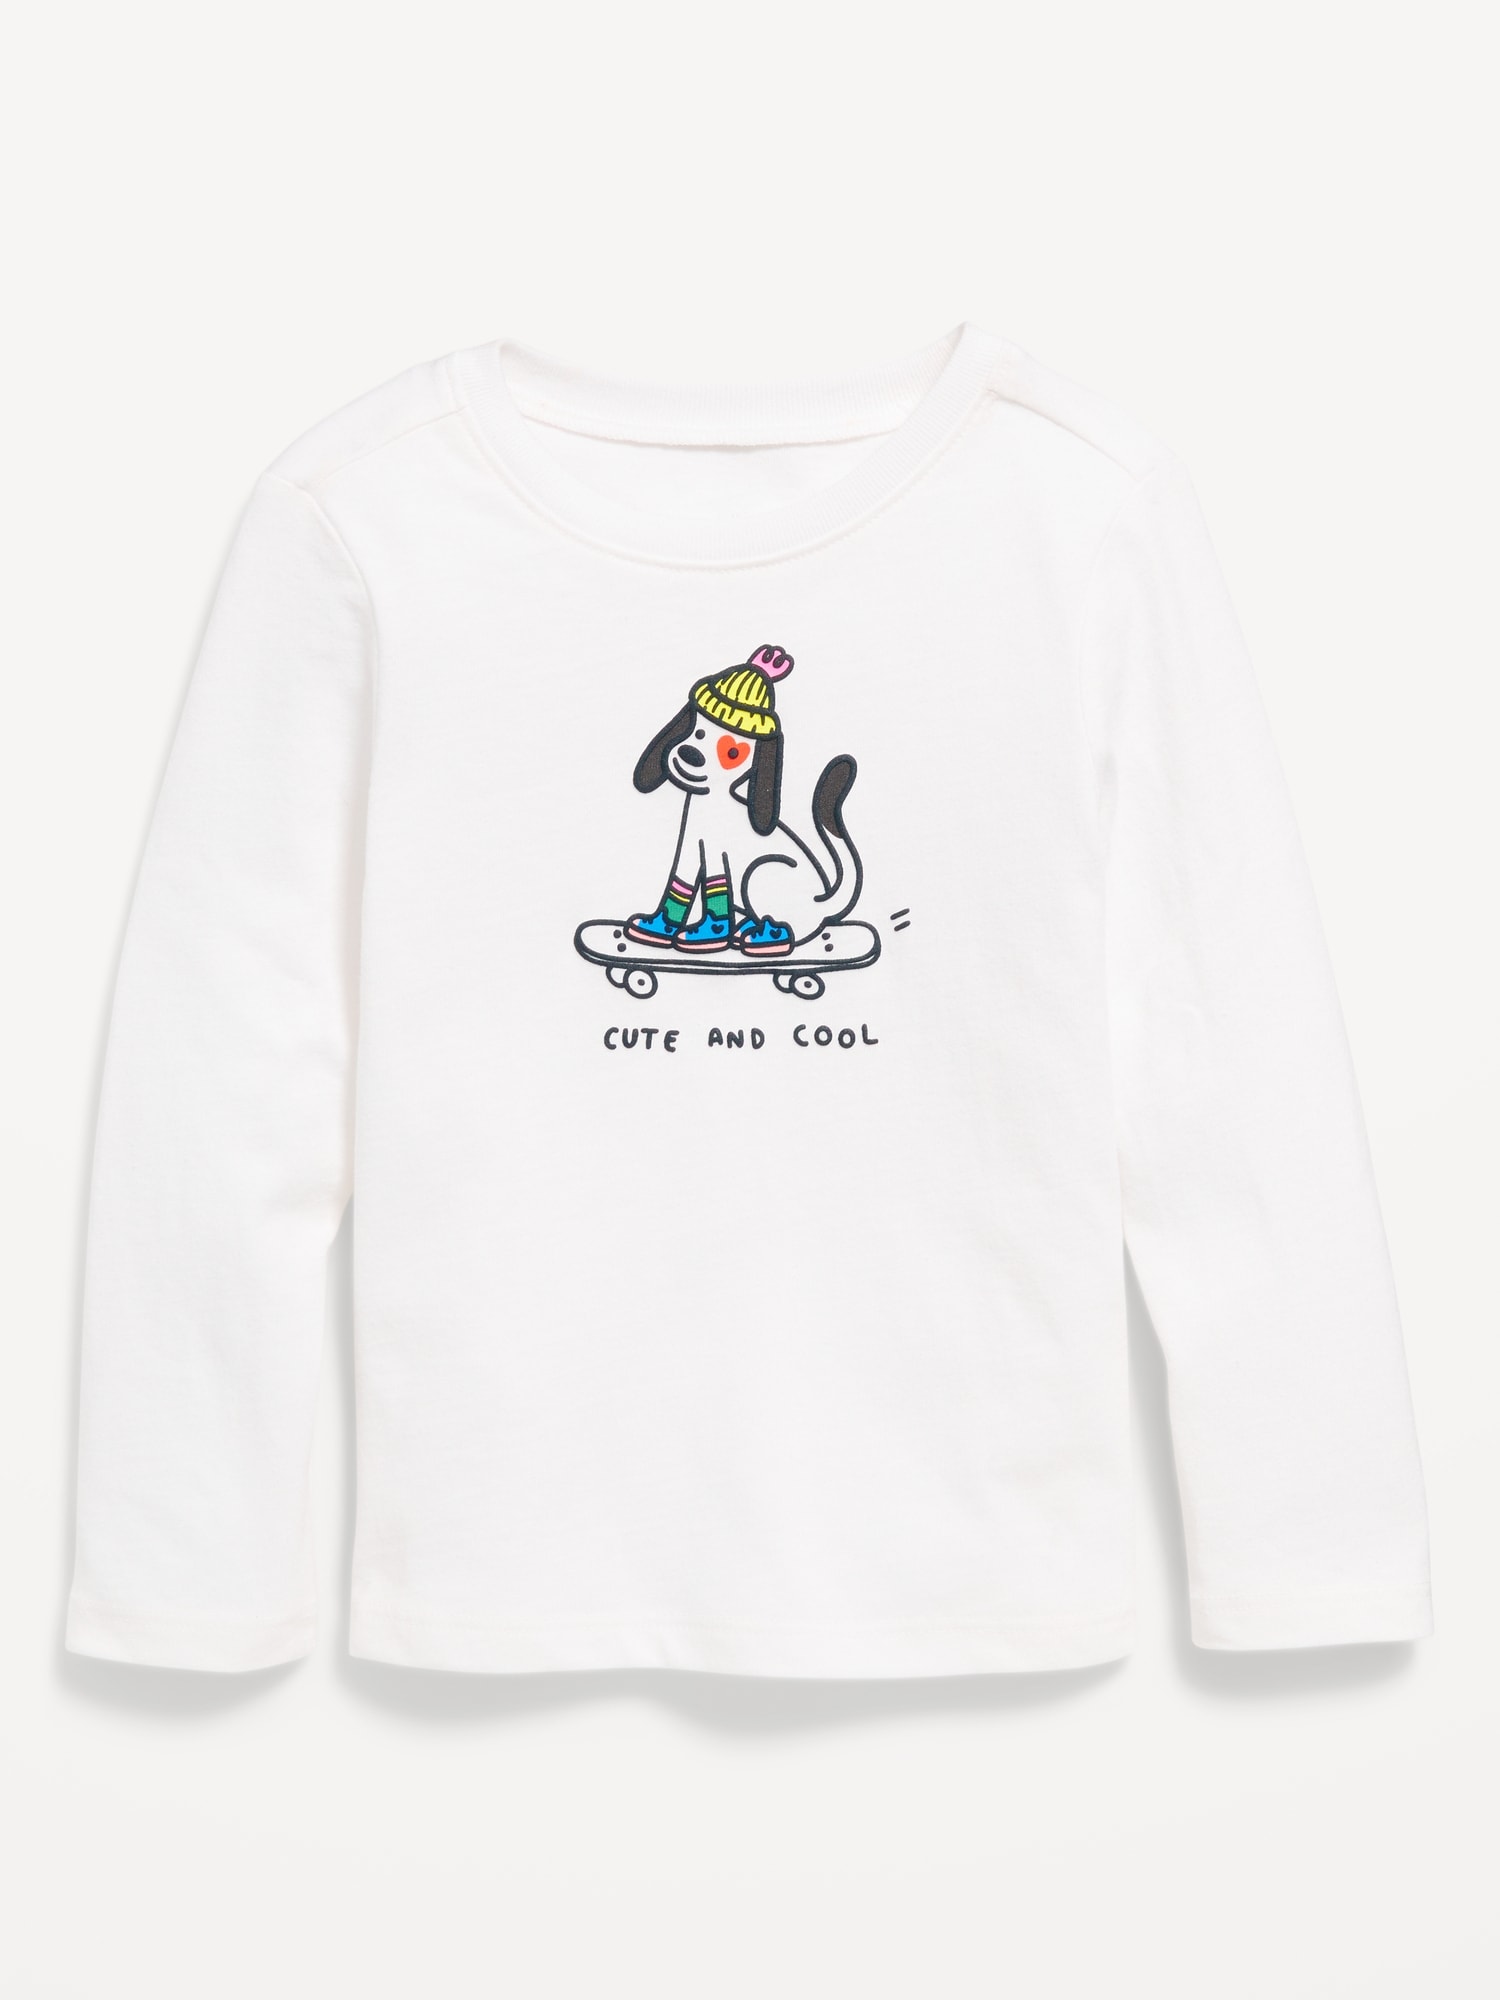 Long-Sleeve Graphic T-Shirt for Toddler Girls